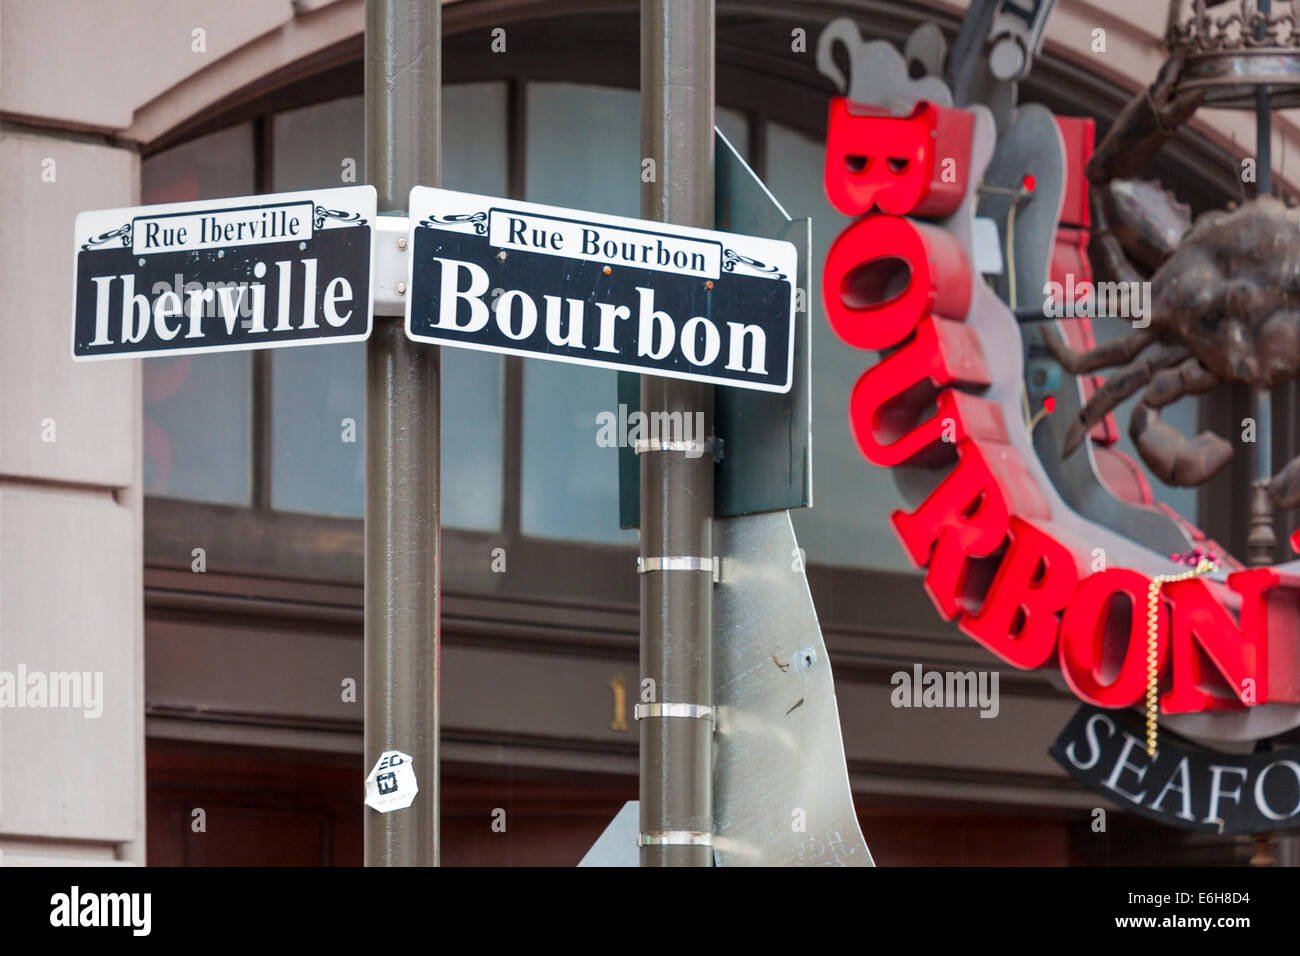 Street signs at the corner of Iberville and Bourbon streets in the French Quarter of New Orleans Stock Photo